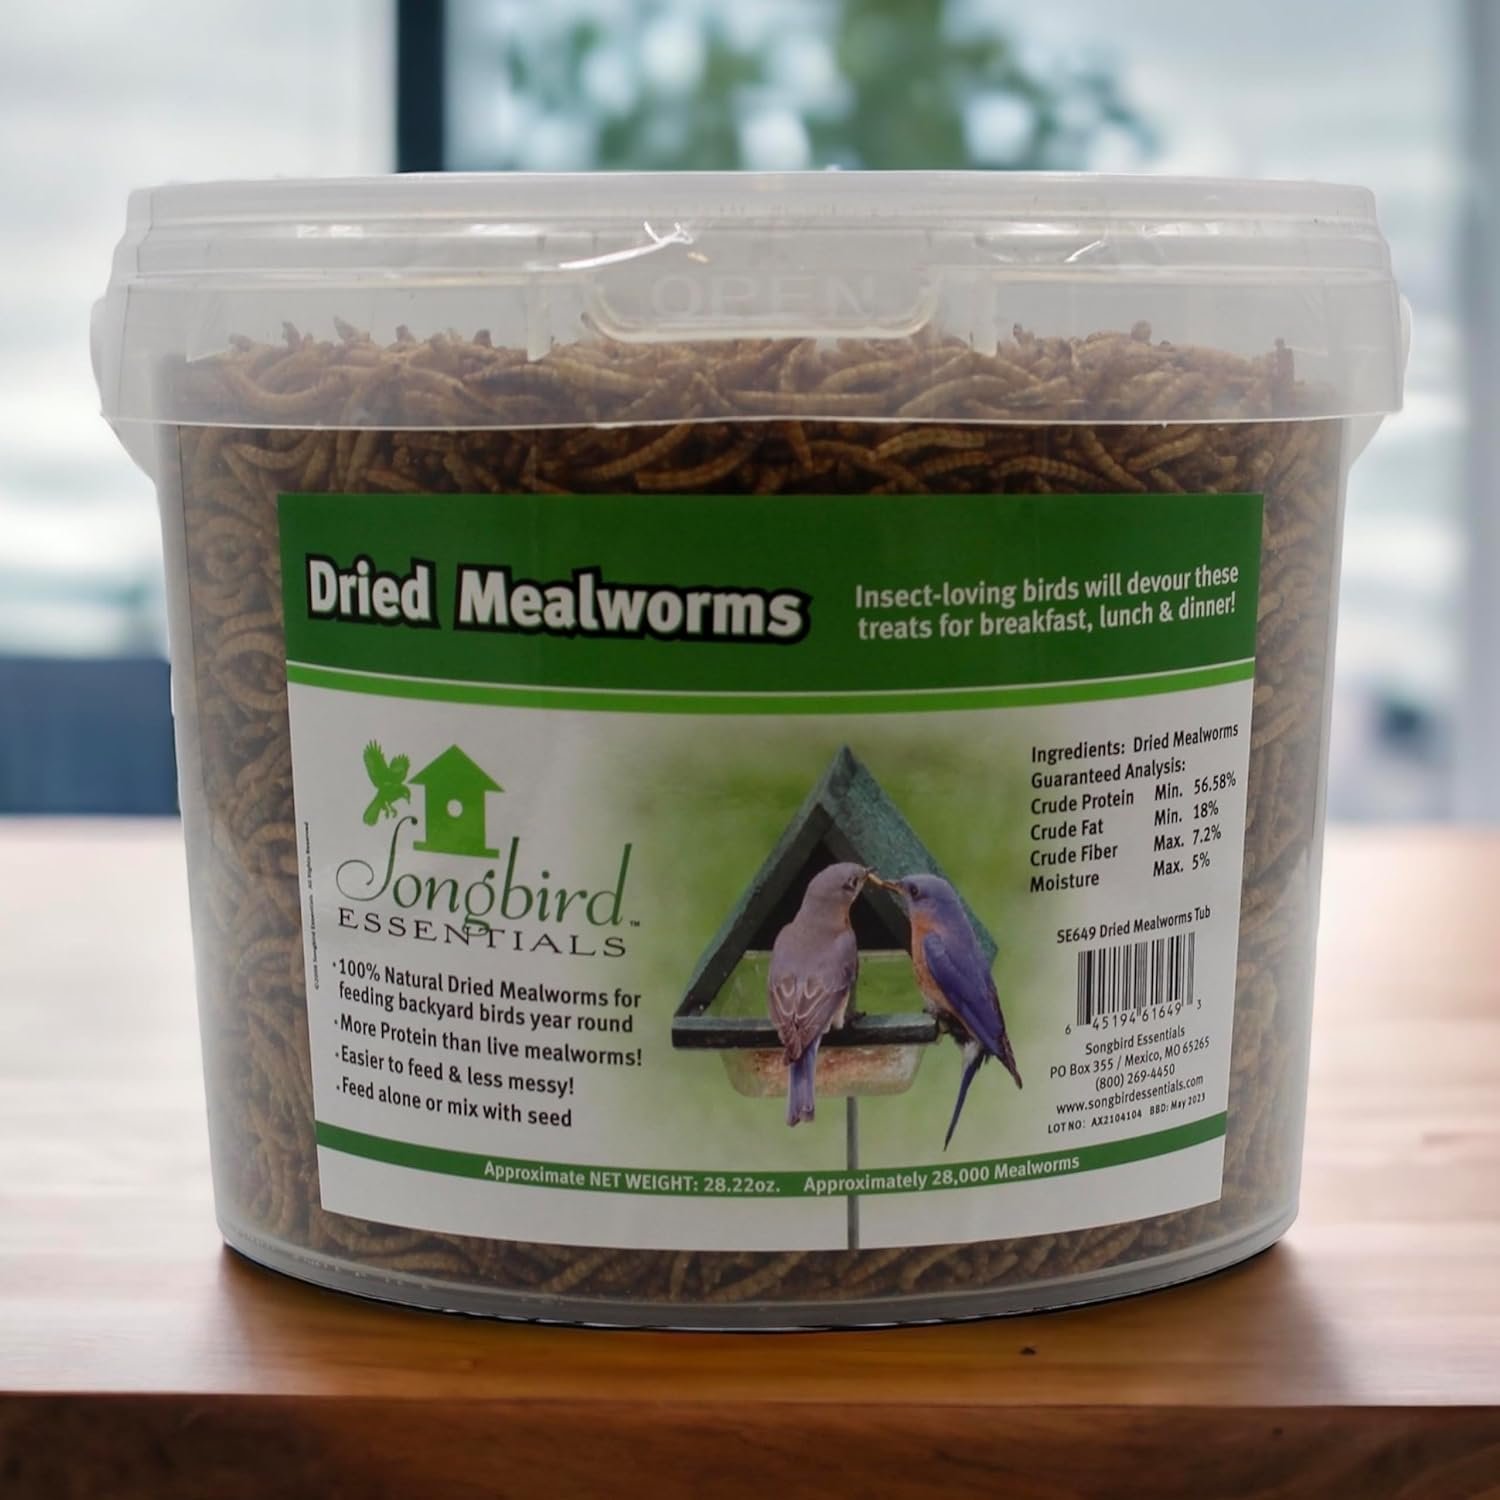 Songbird Essentials Dried Mealworms for Wild Birds, 100% Natural Mealworms for Chickens, Bluebirds, Reptiles and Ducks, 28.22 Ounce Bucket